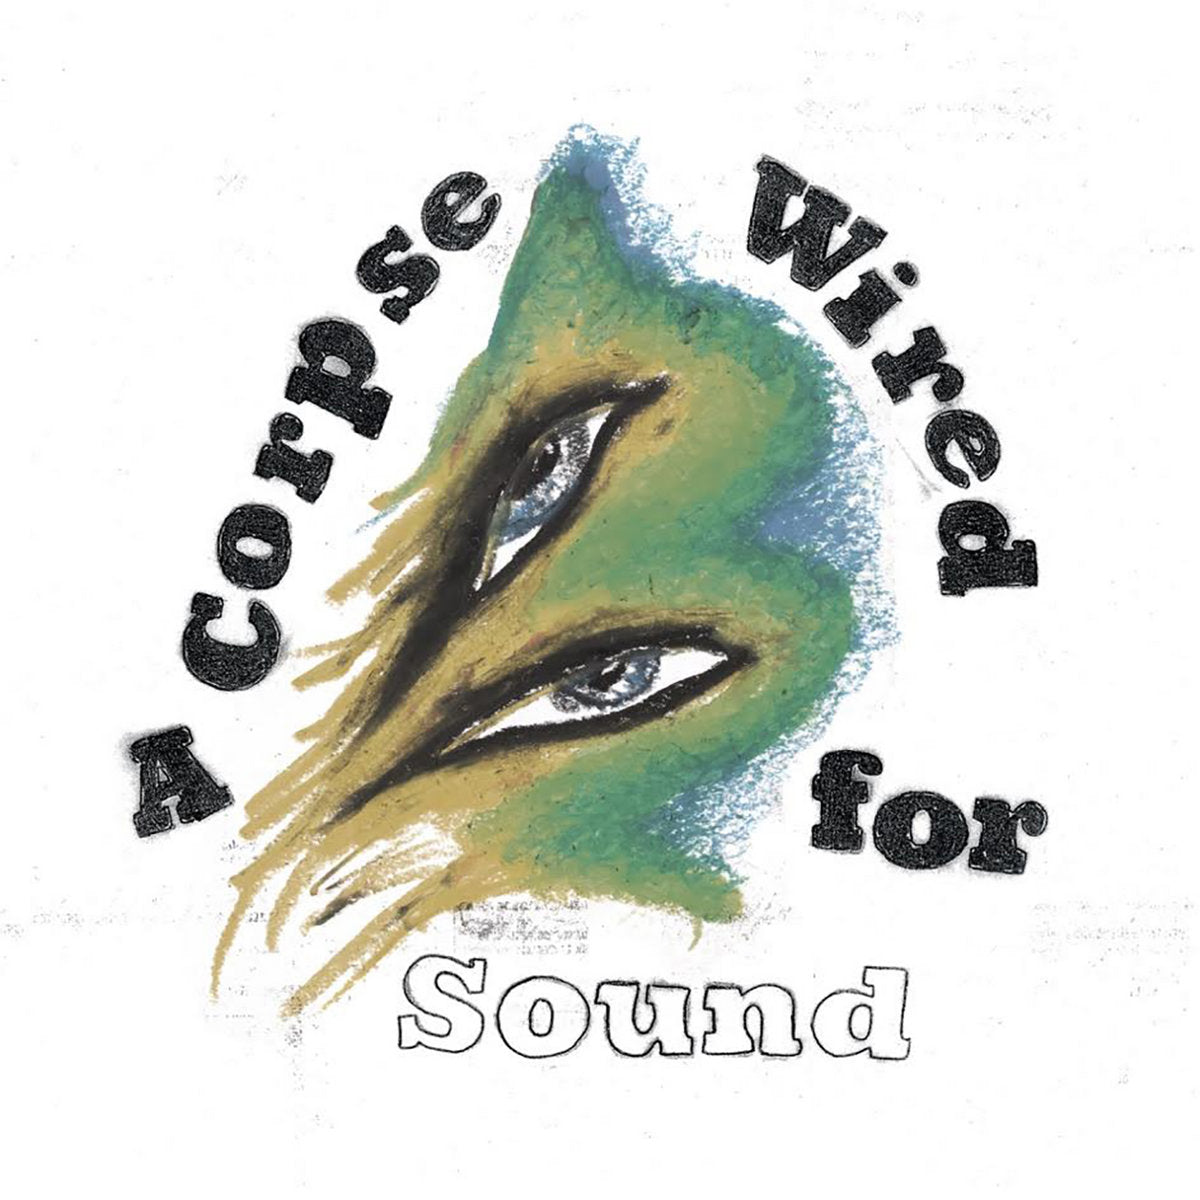 MERCHANDISE - A CORPSE WIRED FOR SOUND Vinyl LP